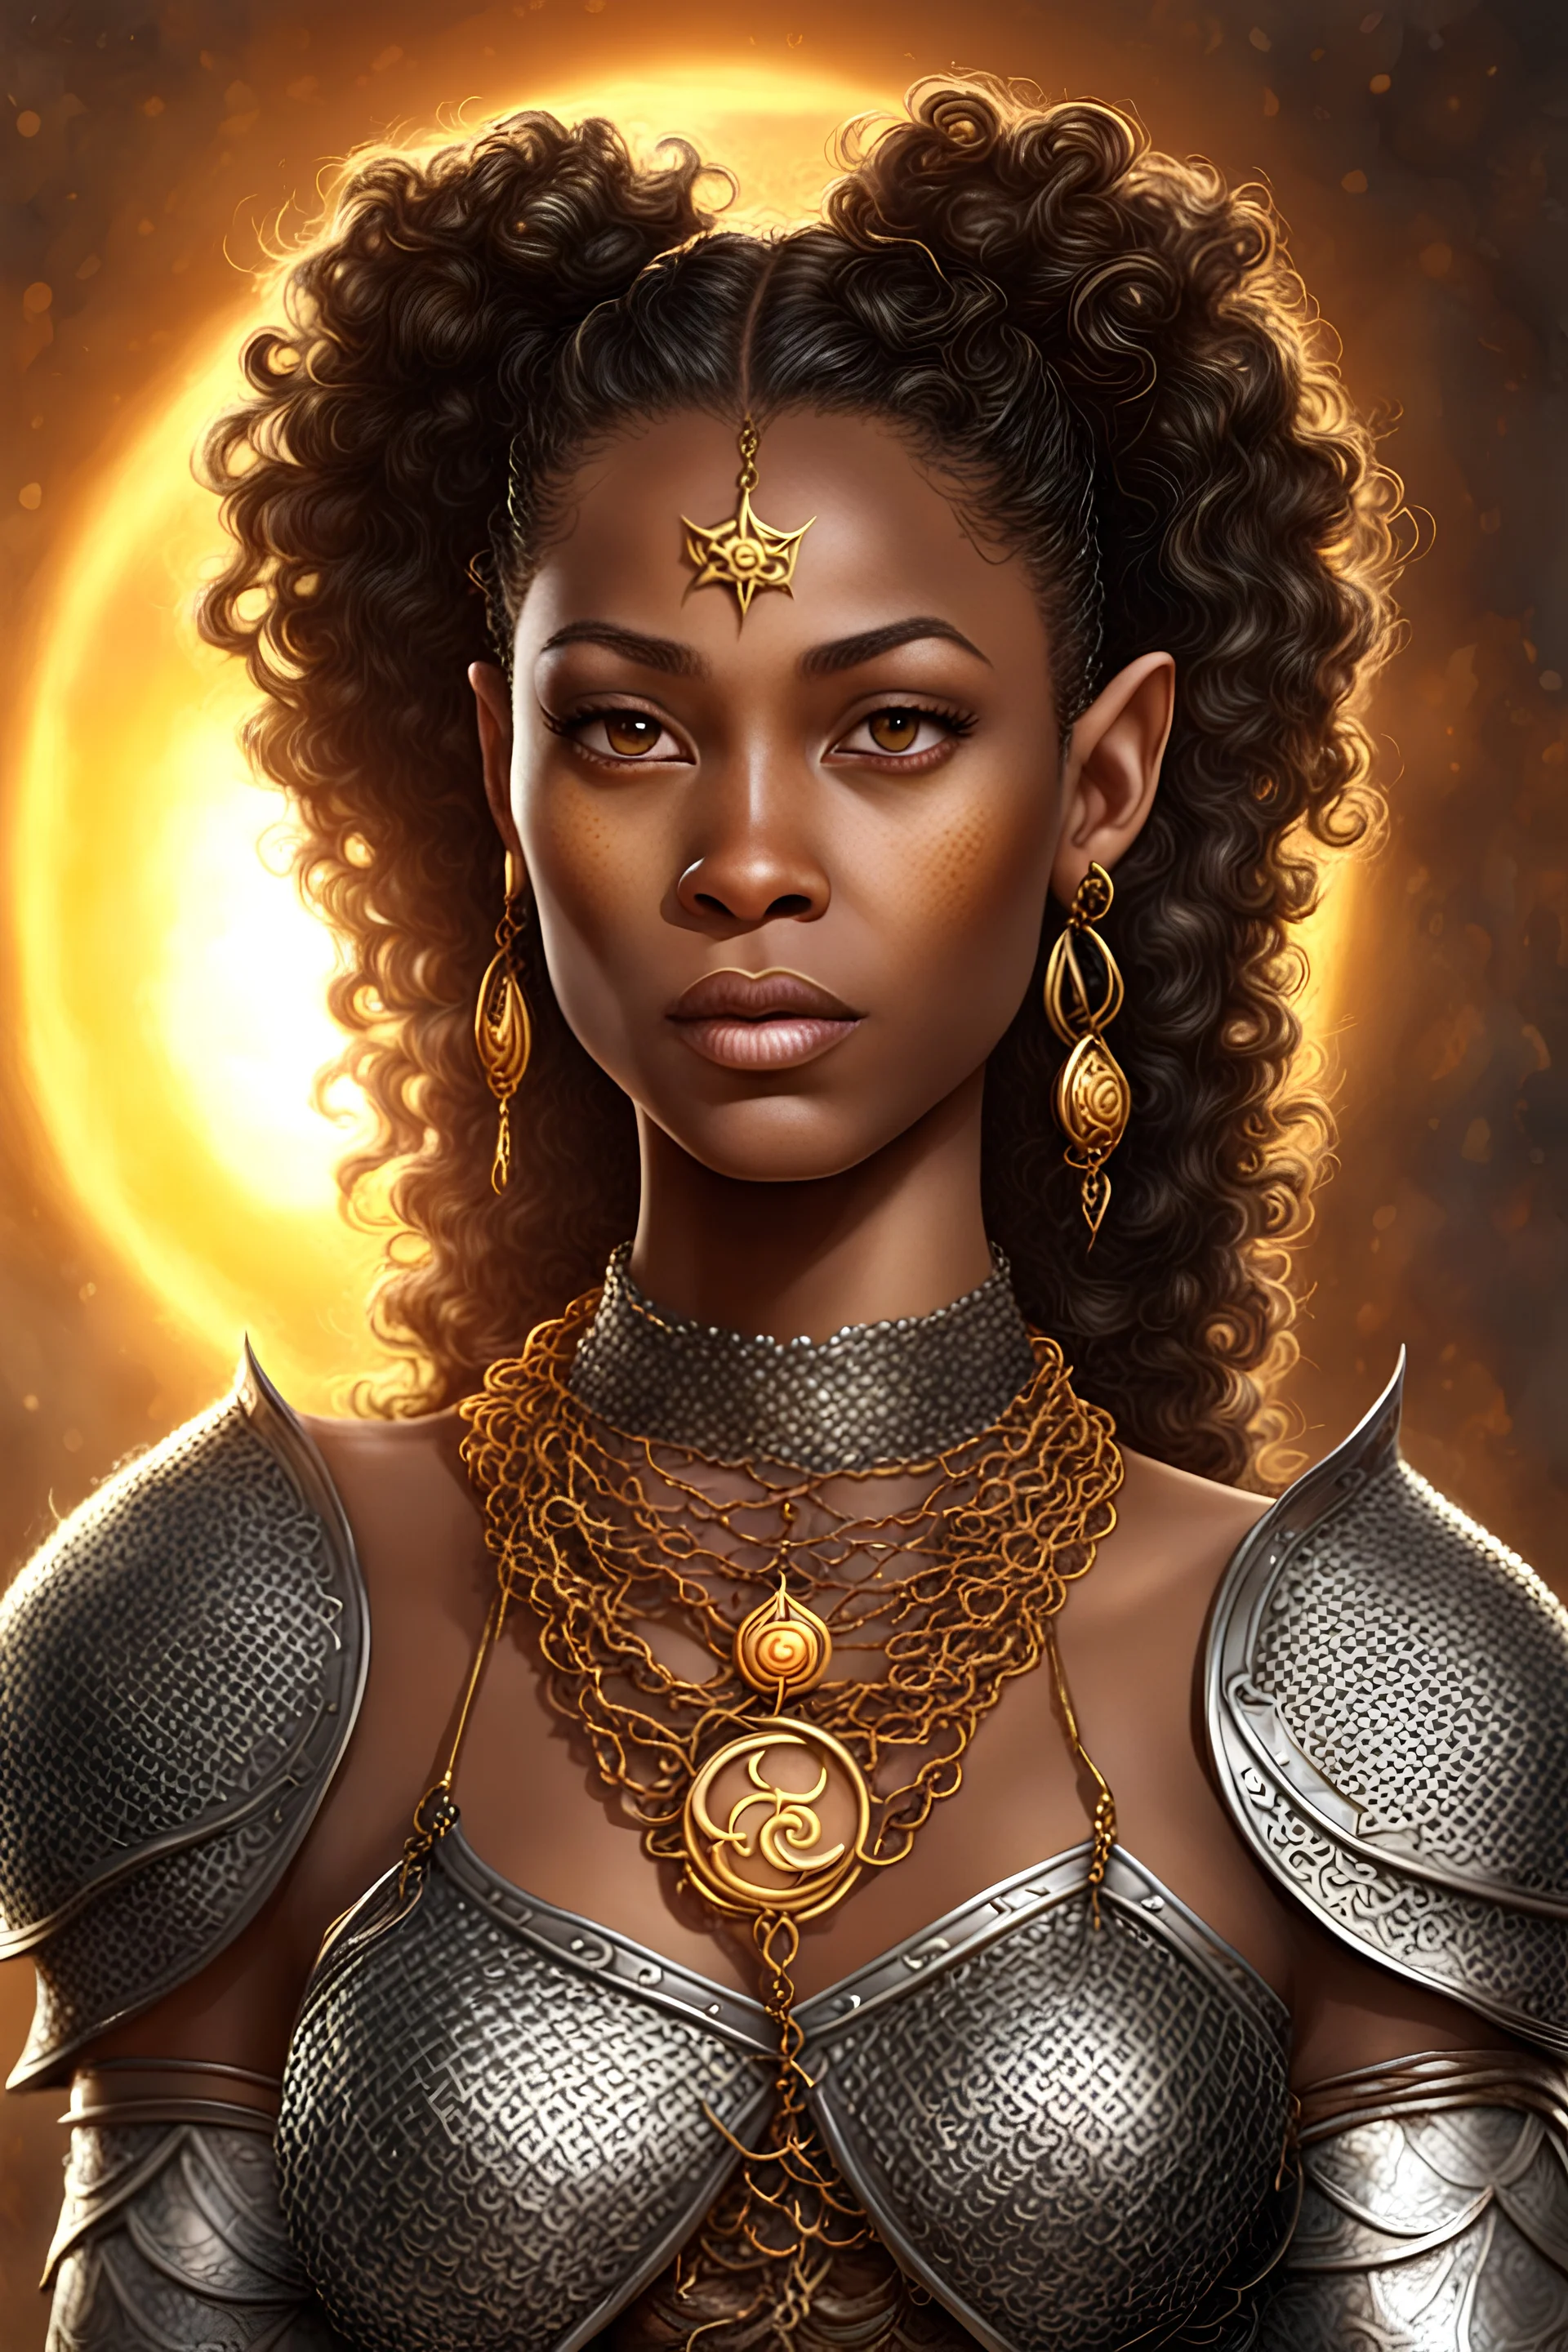 38 years old black woman, elf, brown color eyes, brown small puffy curly ponytail, wears chainmail, necklase with a symbol of sun, no neckline